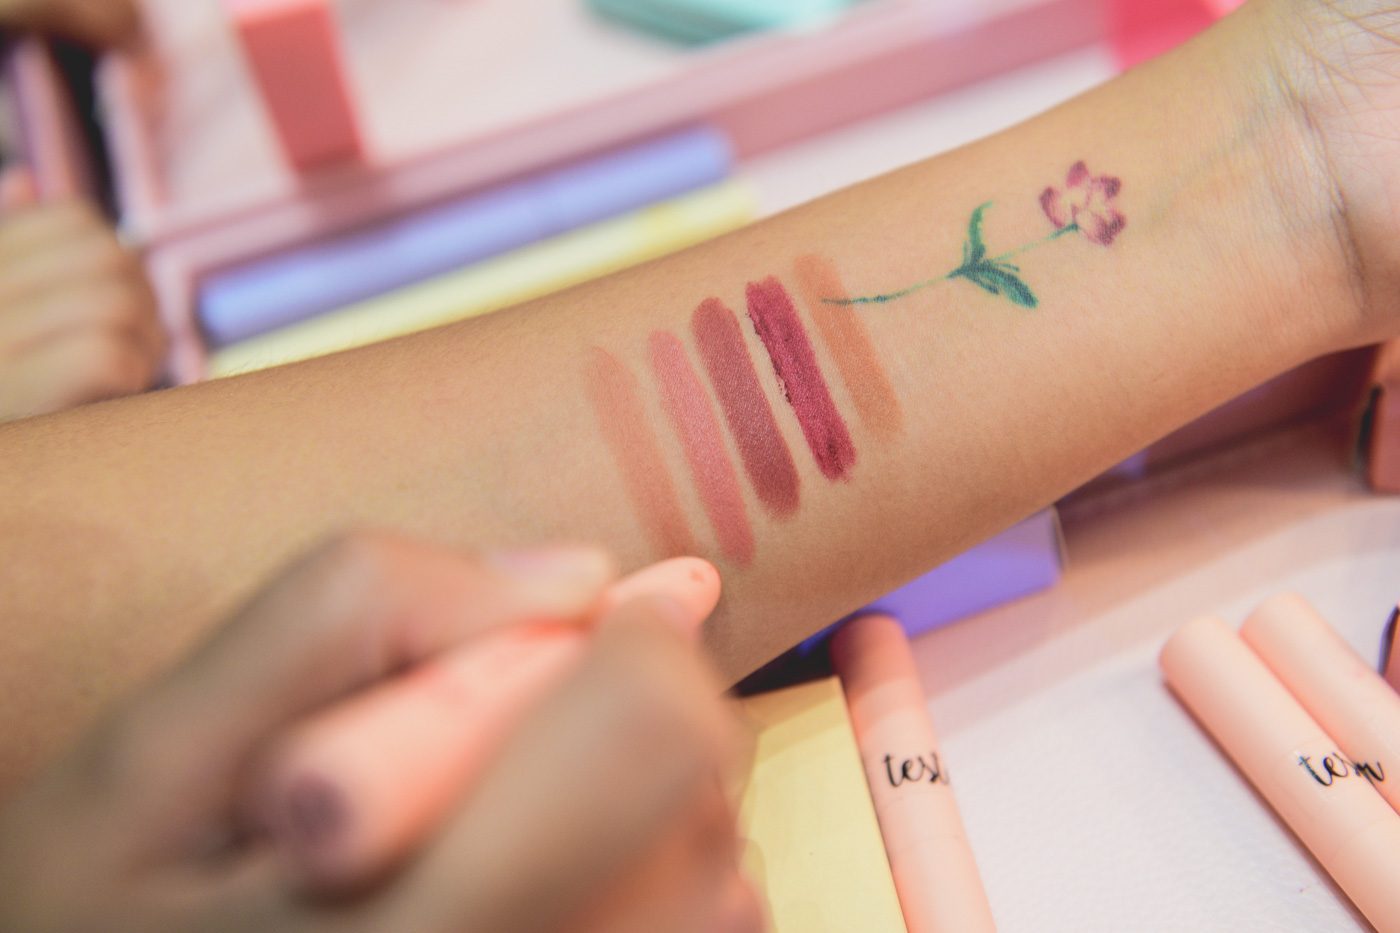 MLBB. The ultra matte lippies come in 5 shades. From left to right: Courage, Authenticity, Wonder, Moxie, Spunk.